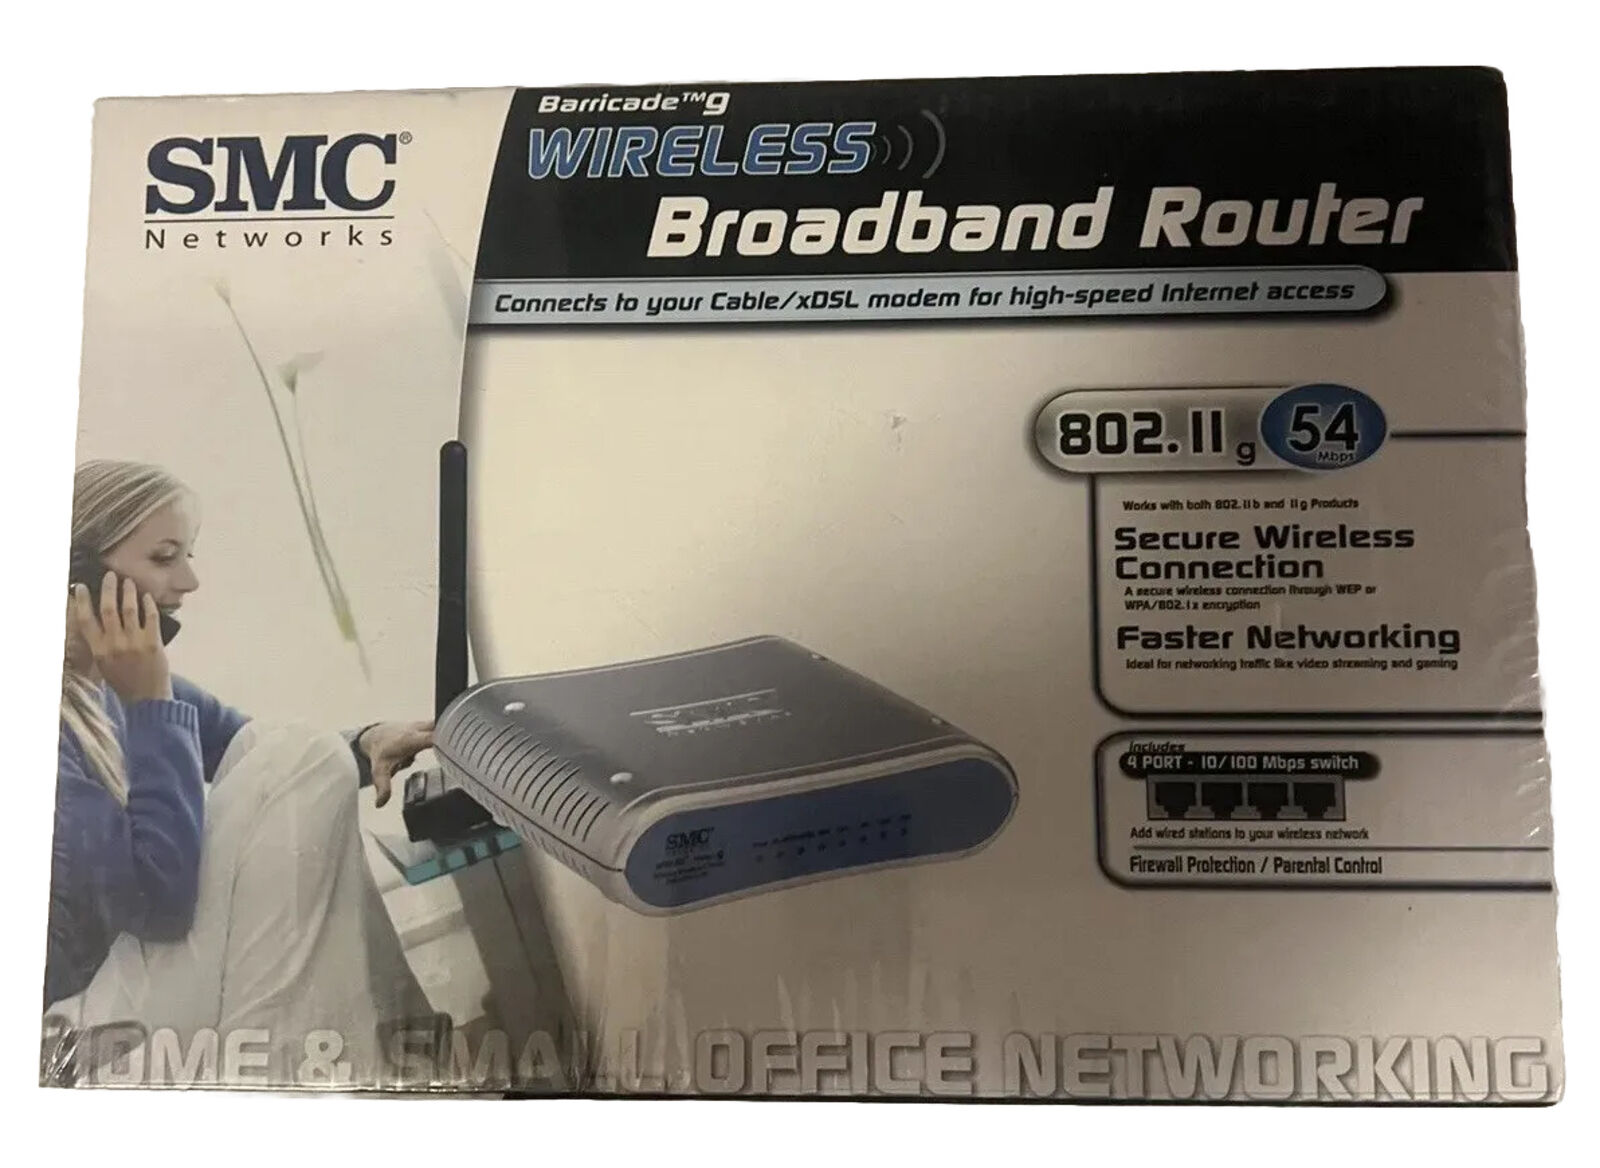 SMC Wireless 54mbps Broadband Router 802.11g Secure Wireless Connection NEW